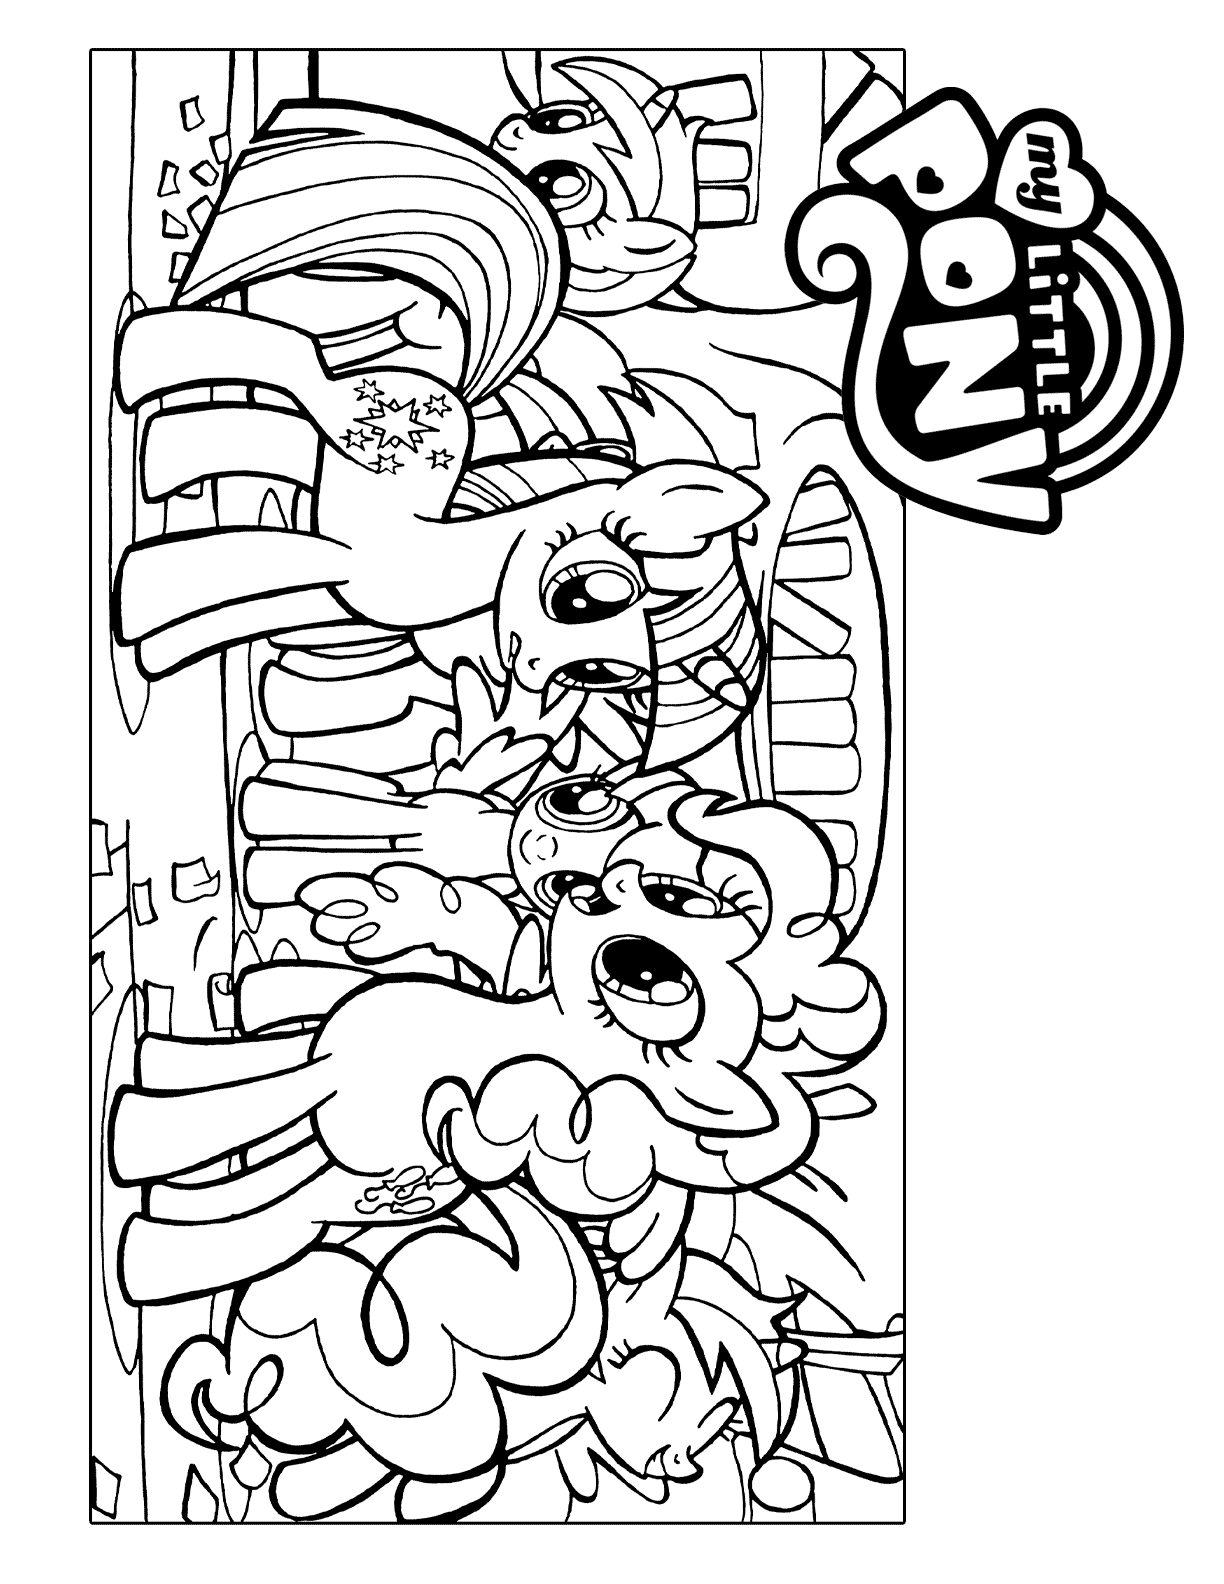 My Little Pony Scene with Pinkie Pie for Coloring